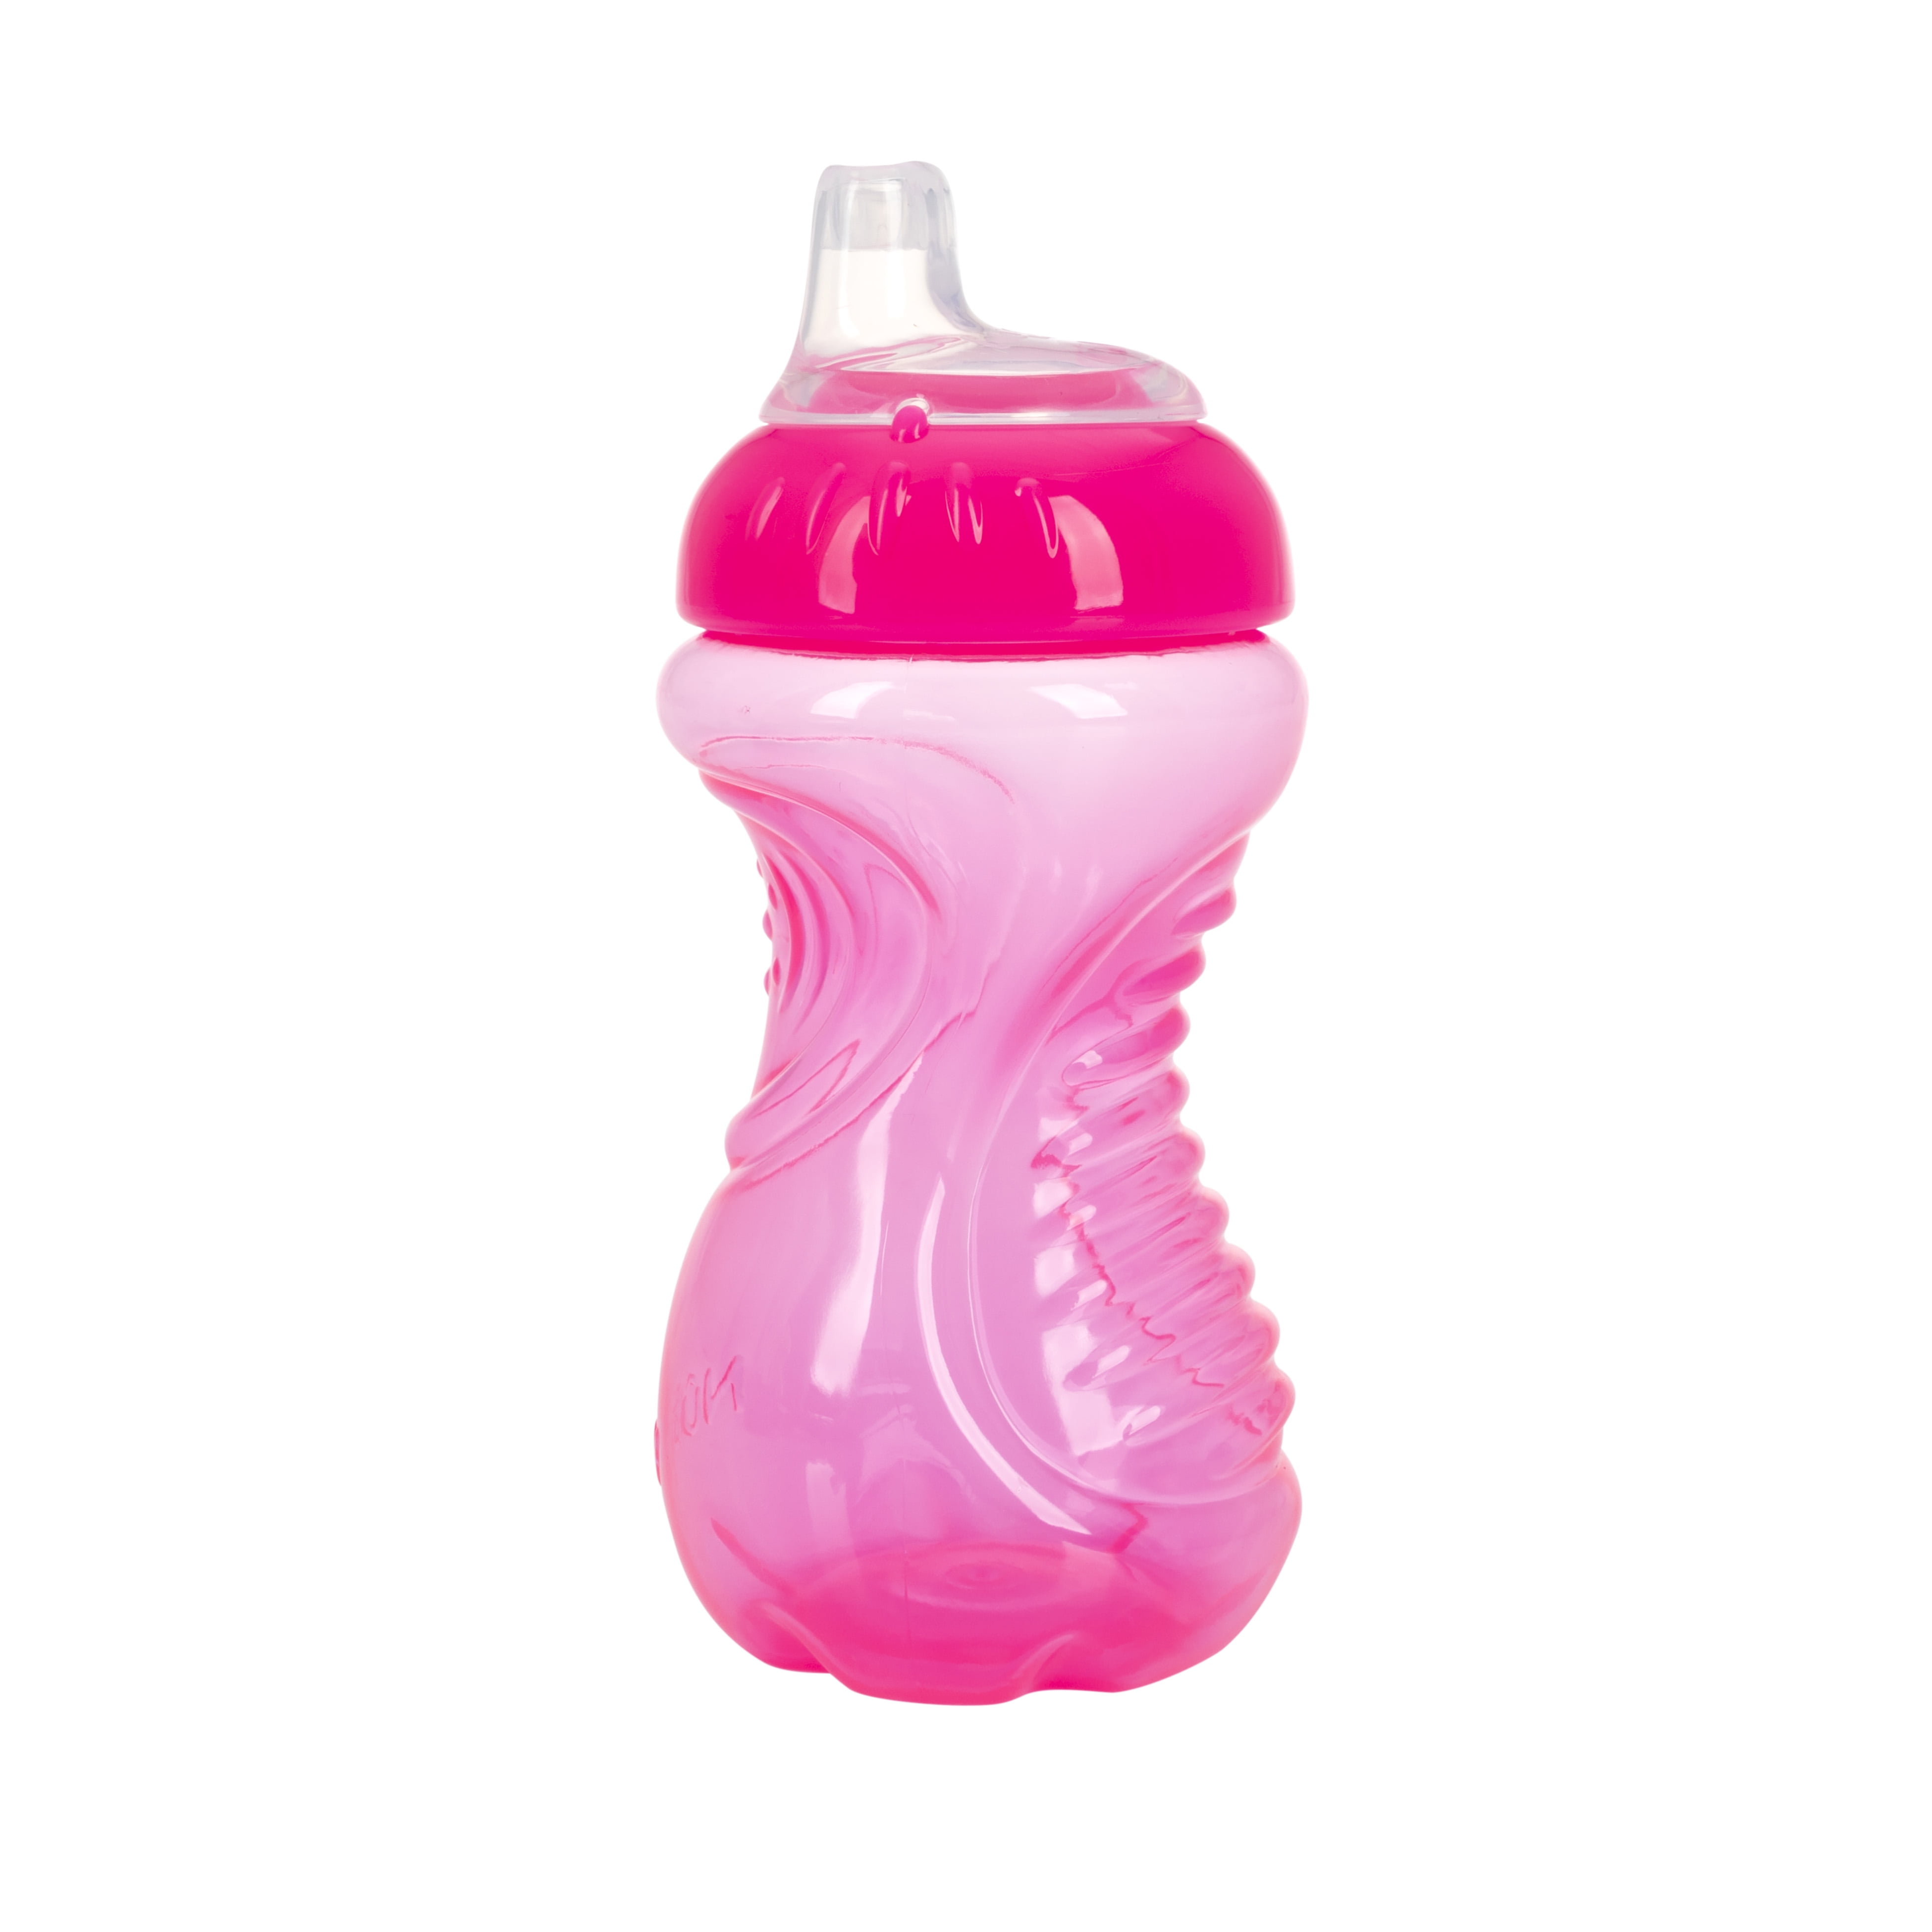 Gag Gifts: Adult Sippy Cups - I Can't Adult Right Now! Baby Pink